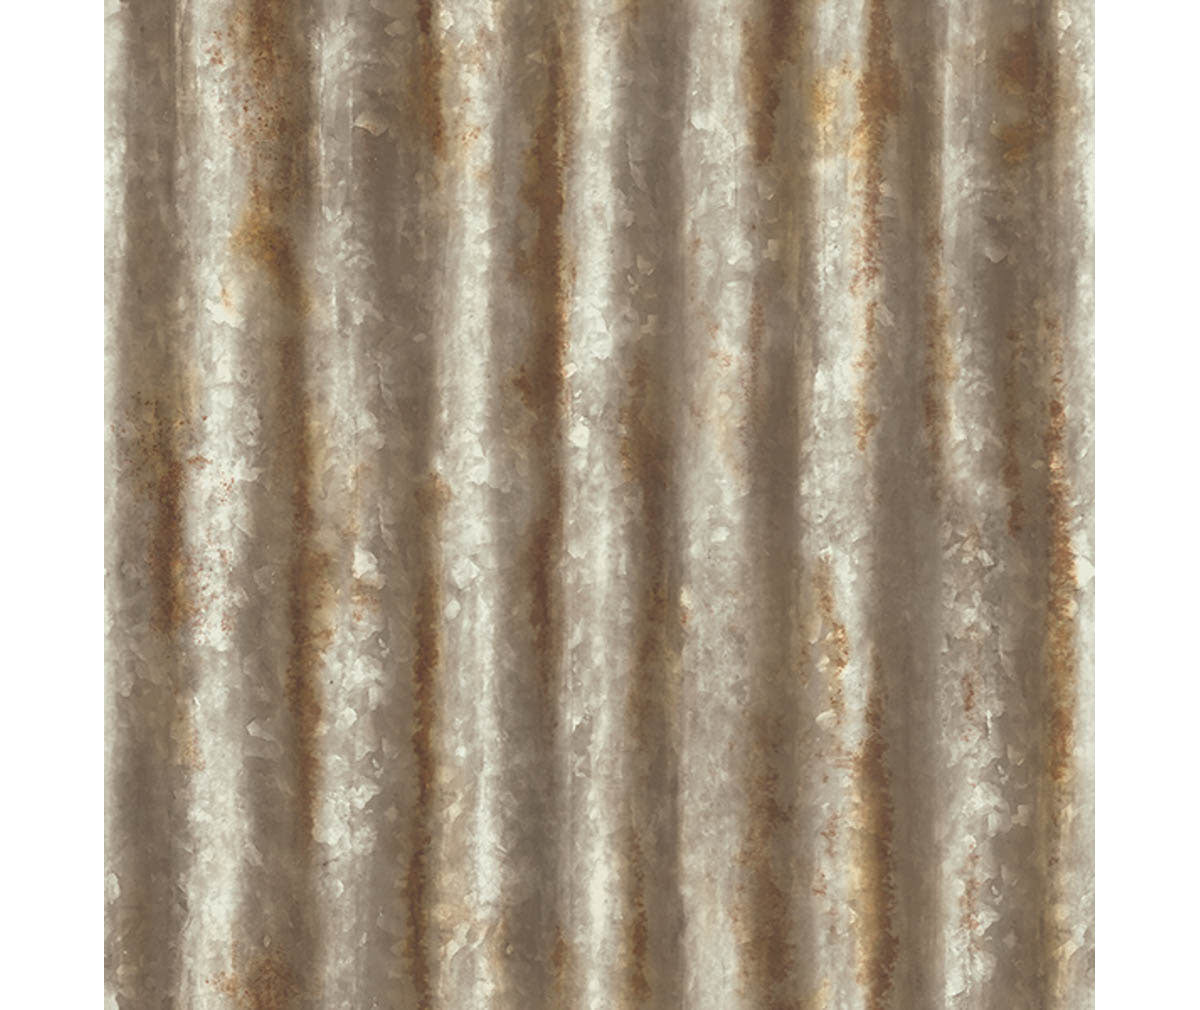 Corrugated Metal Rust Industrial Texture Wallpaper available at Barrydowne Paint